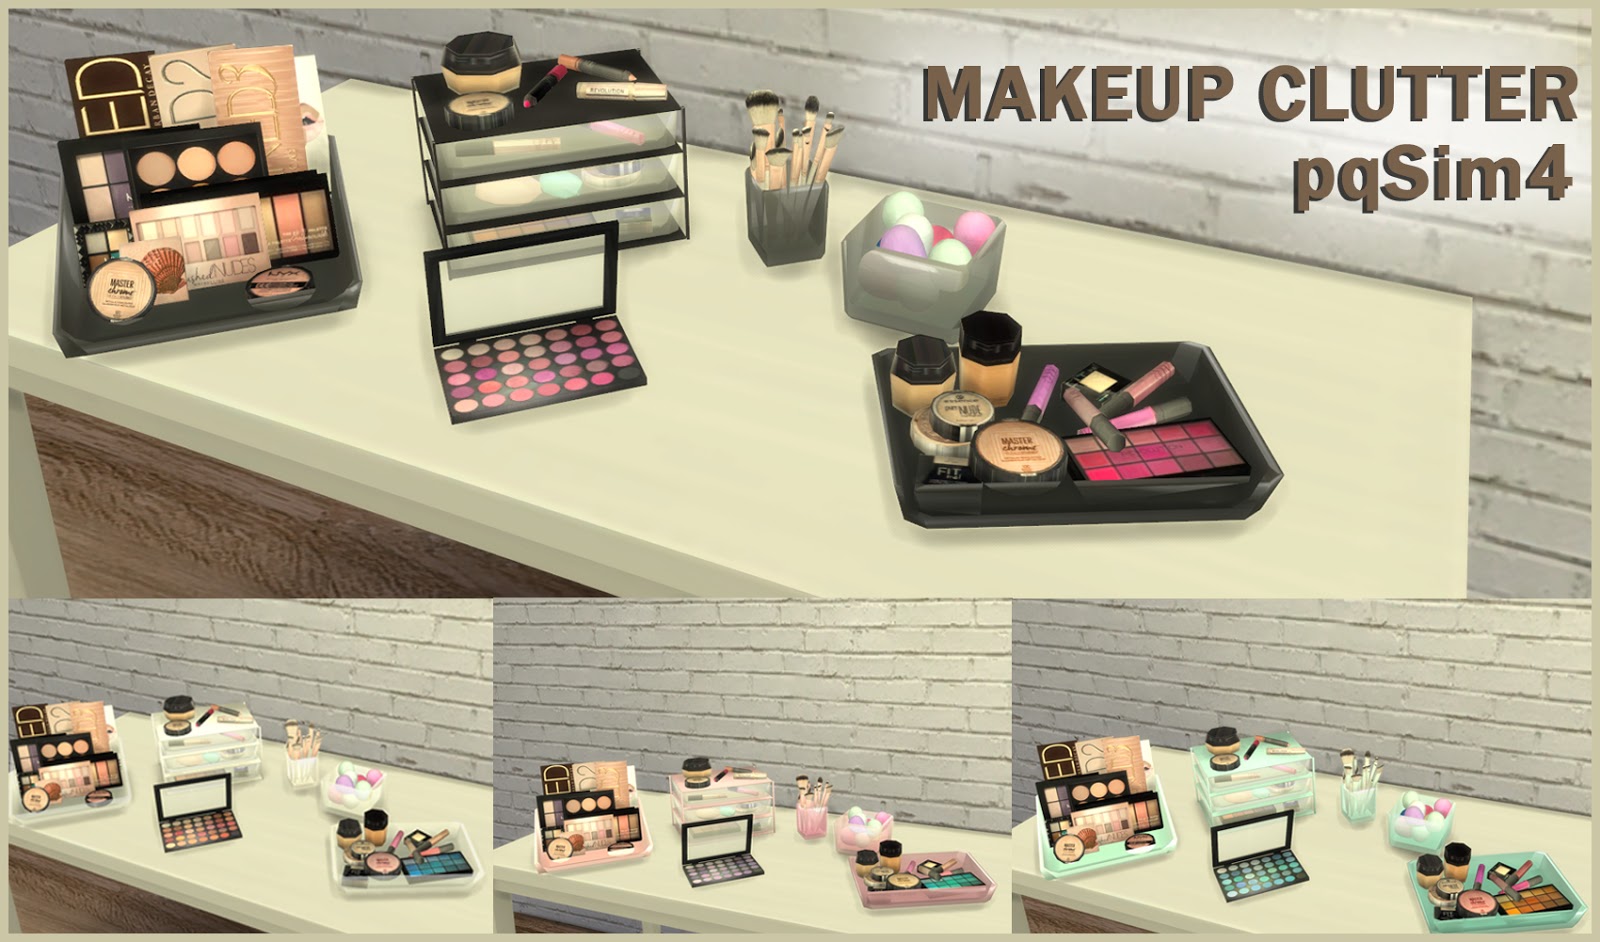 Makeup Clutter The Sims 4 Custom Content